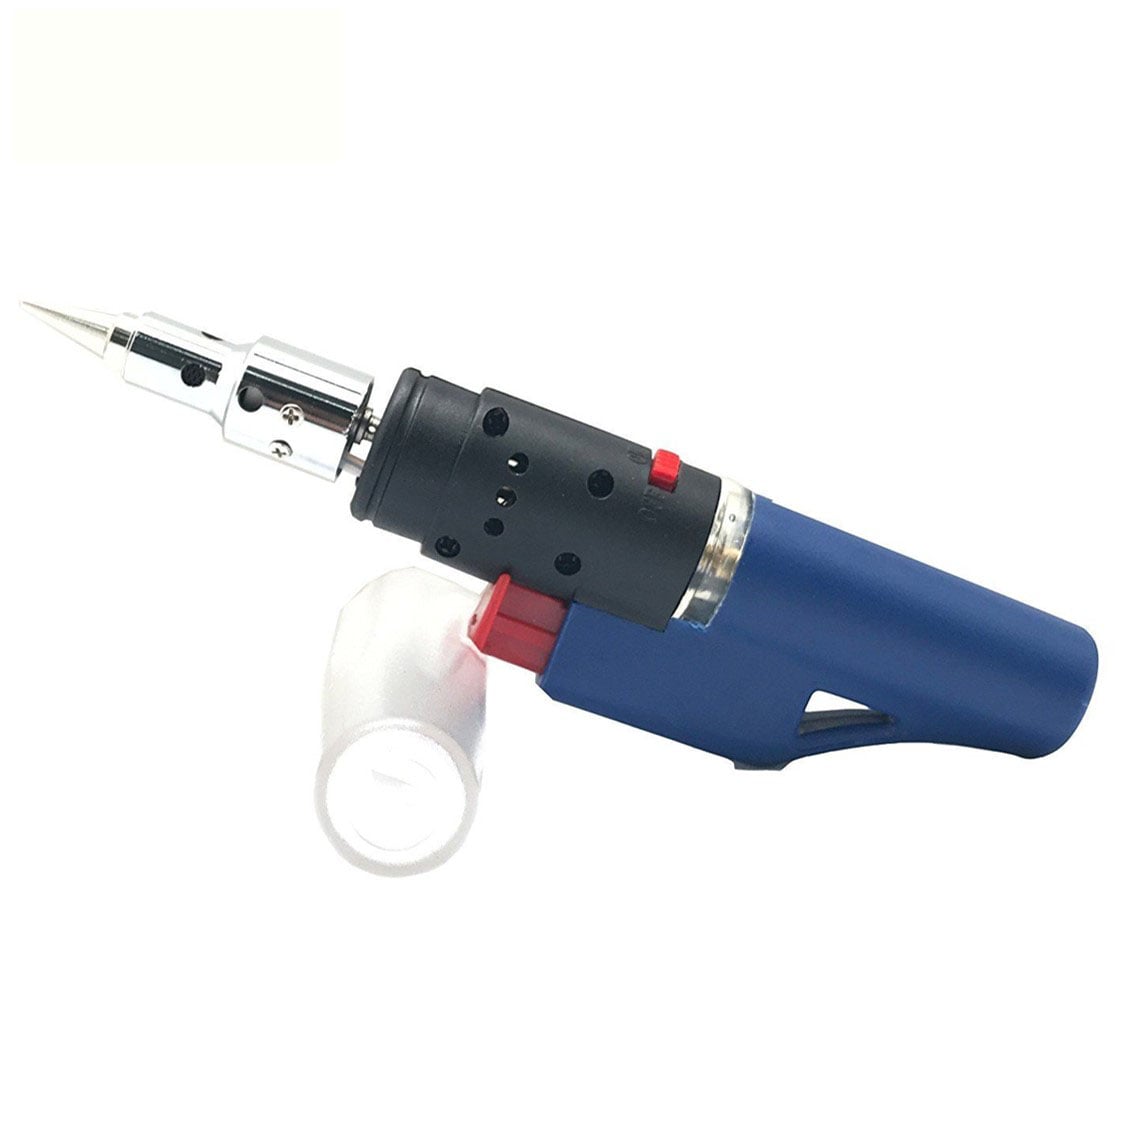 How To Use The Cordless Soldering Iron?